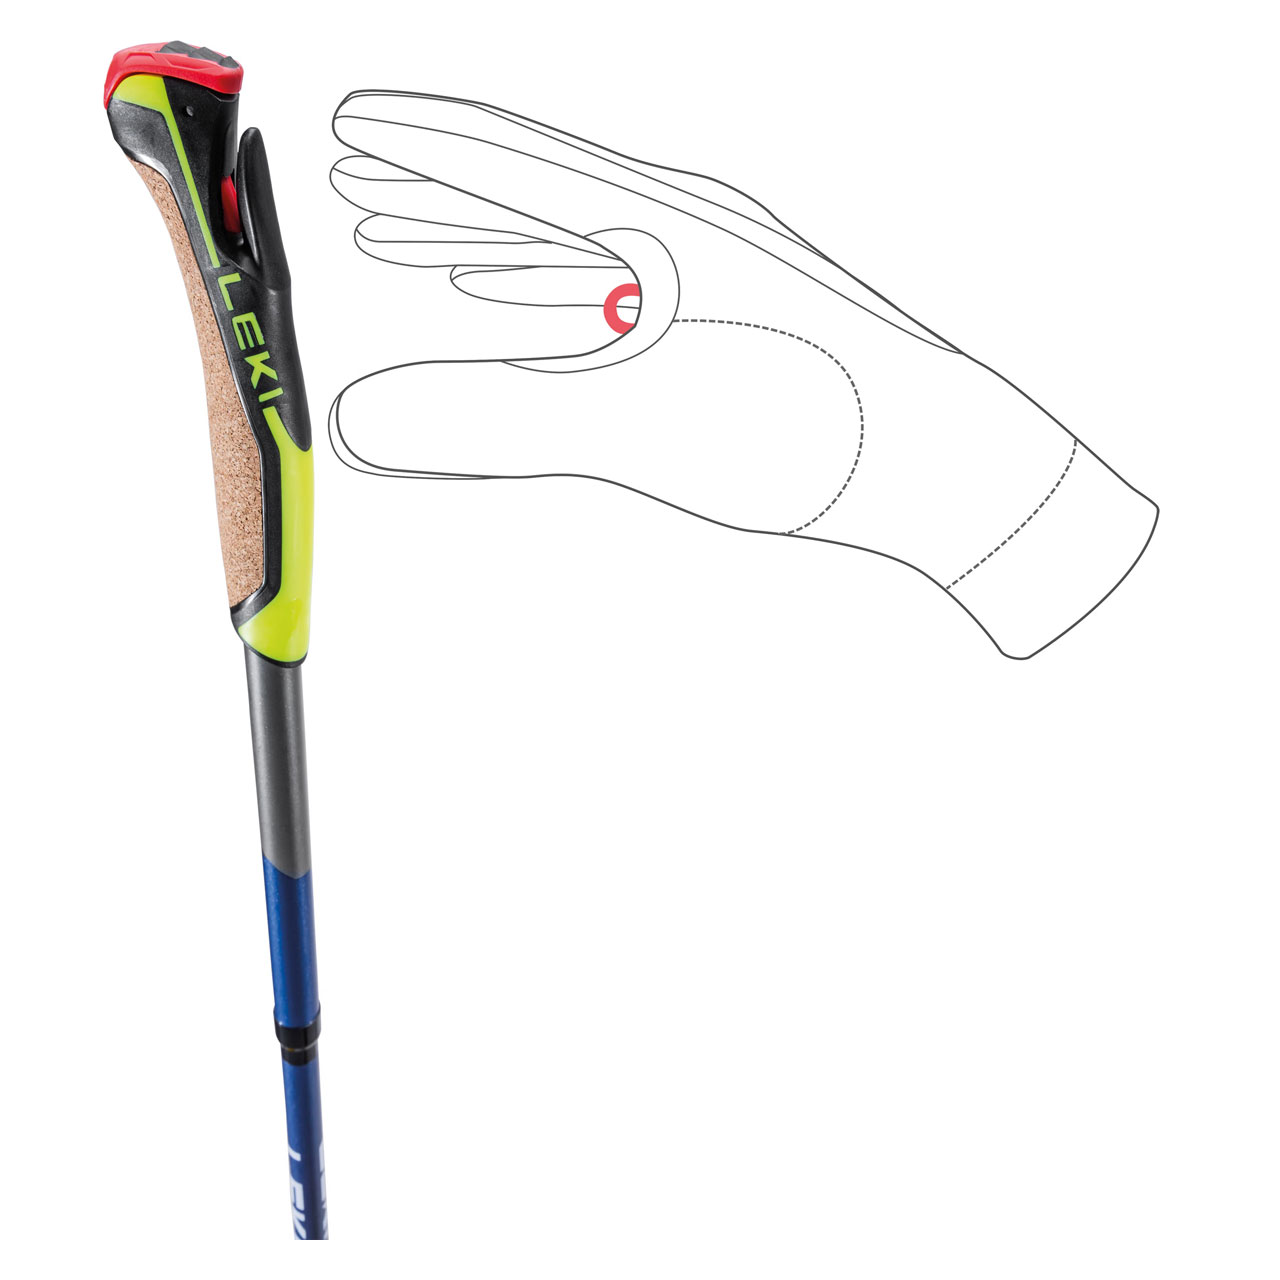 Nordic Walking Stock Traveller FX.One Carbon 